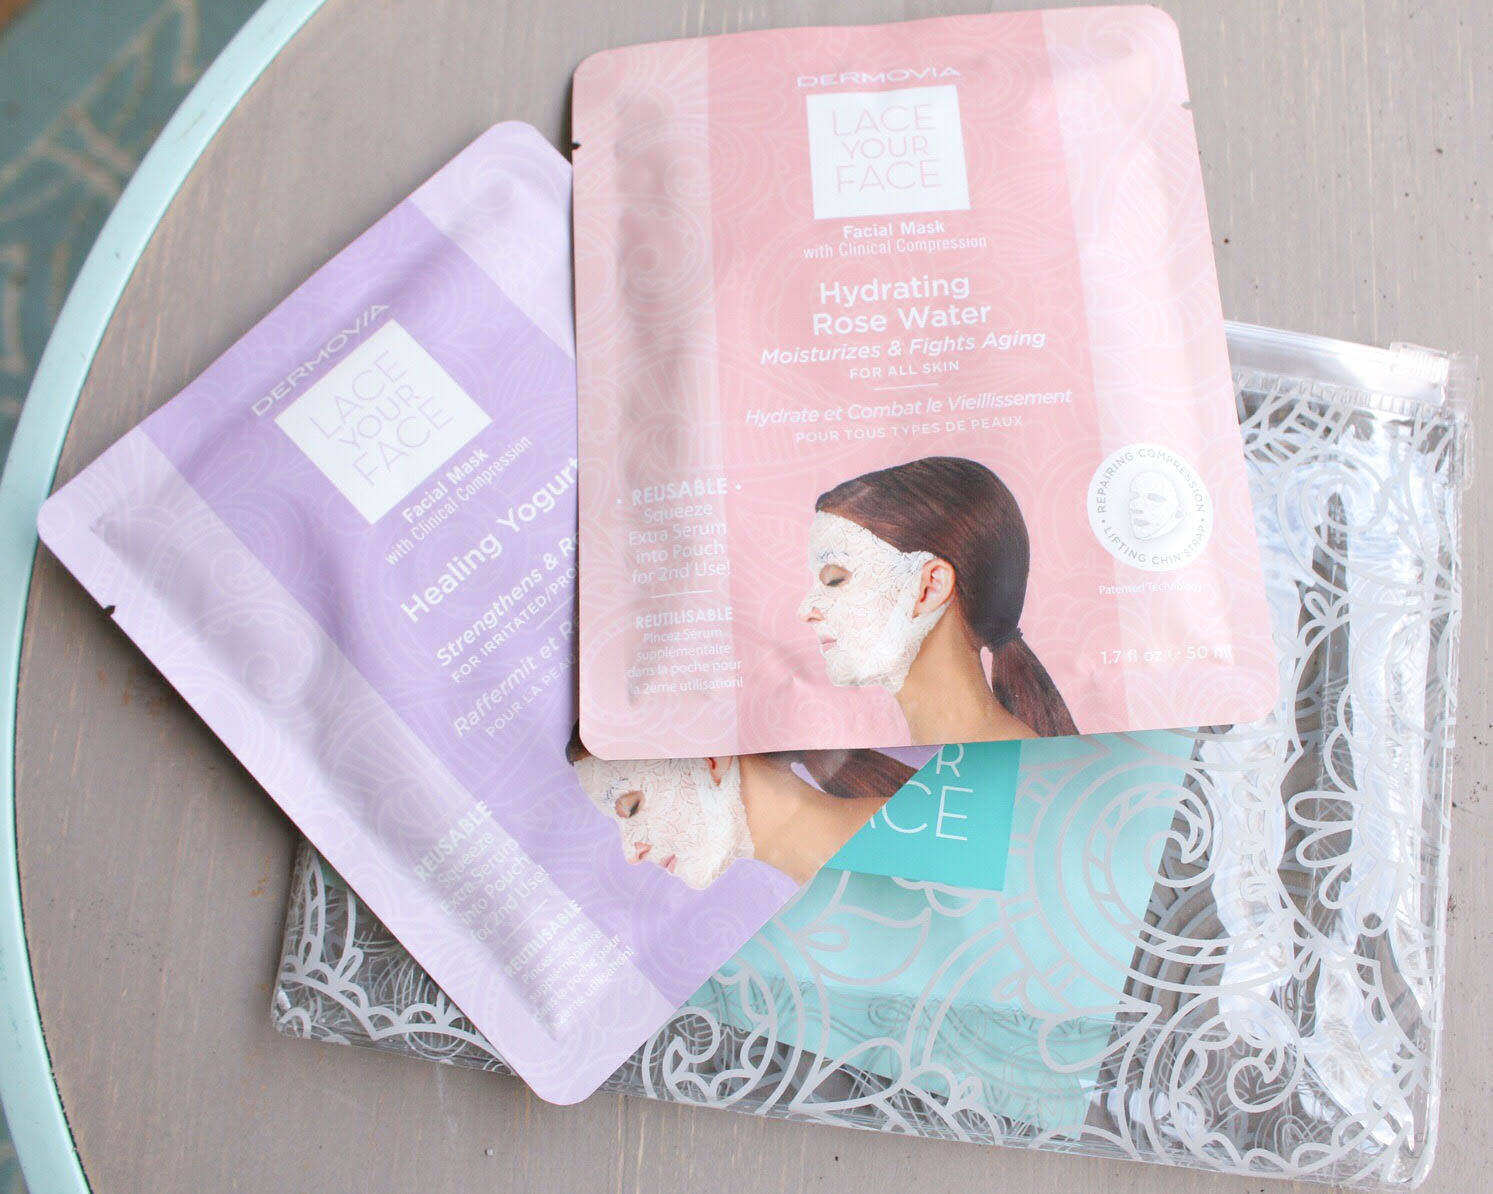 Dermovia Lace-up Face Masks! Changing the Skincare Game. – Sélah Christeen